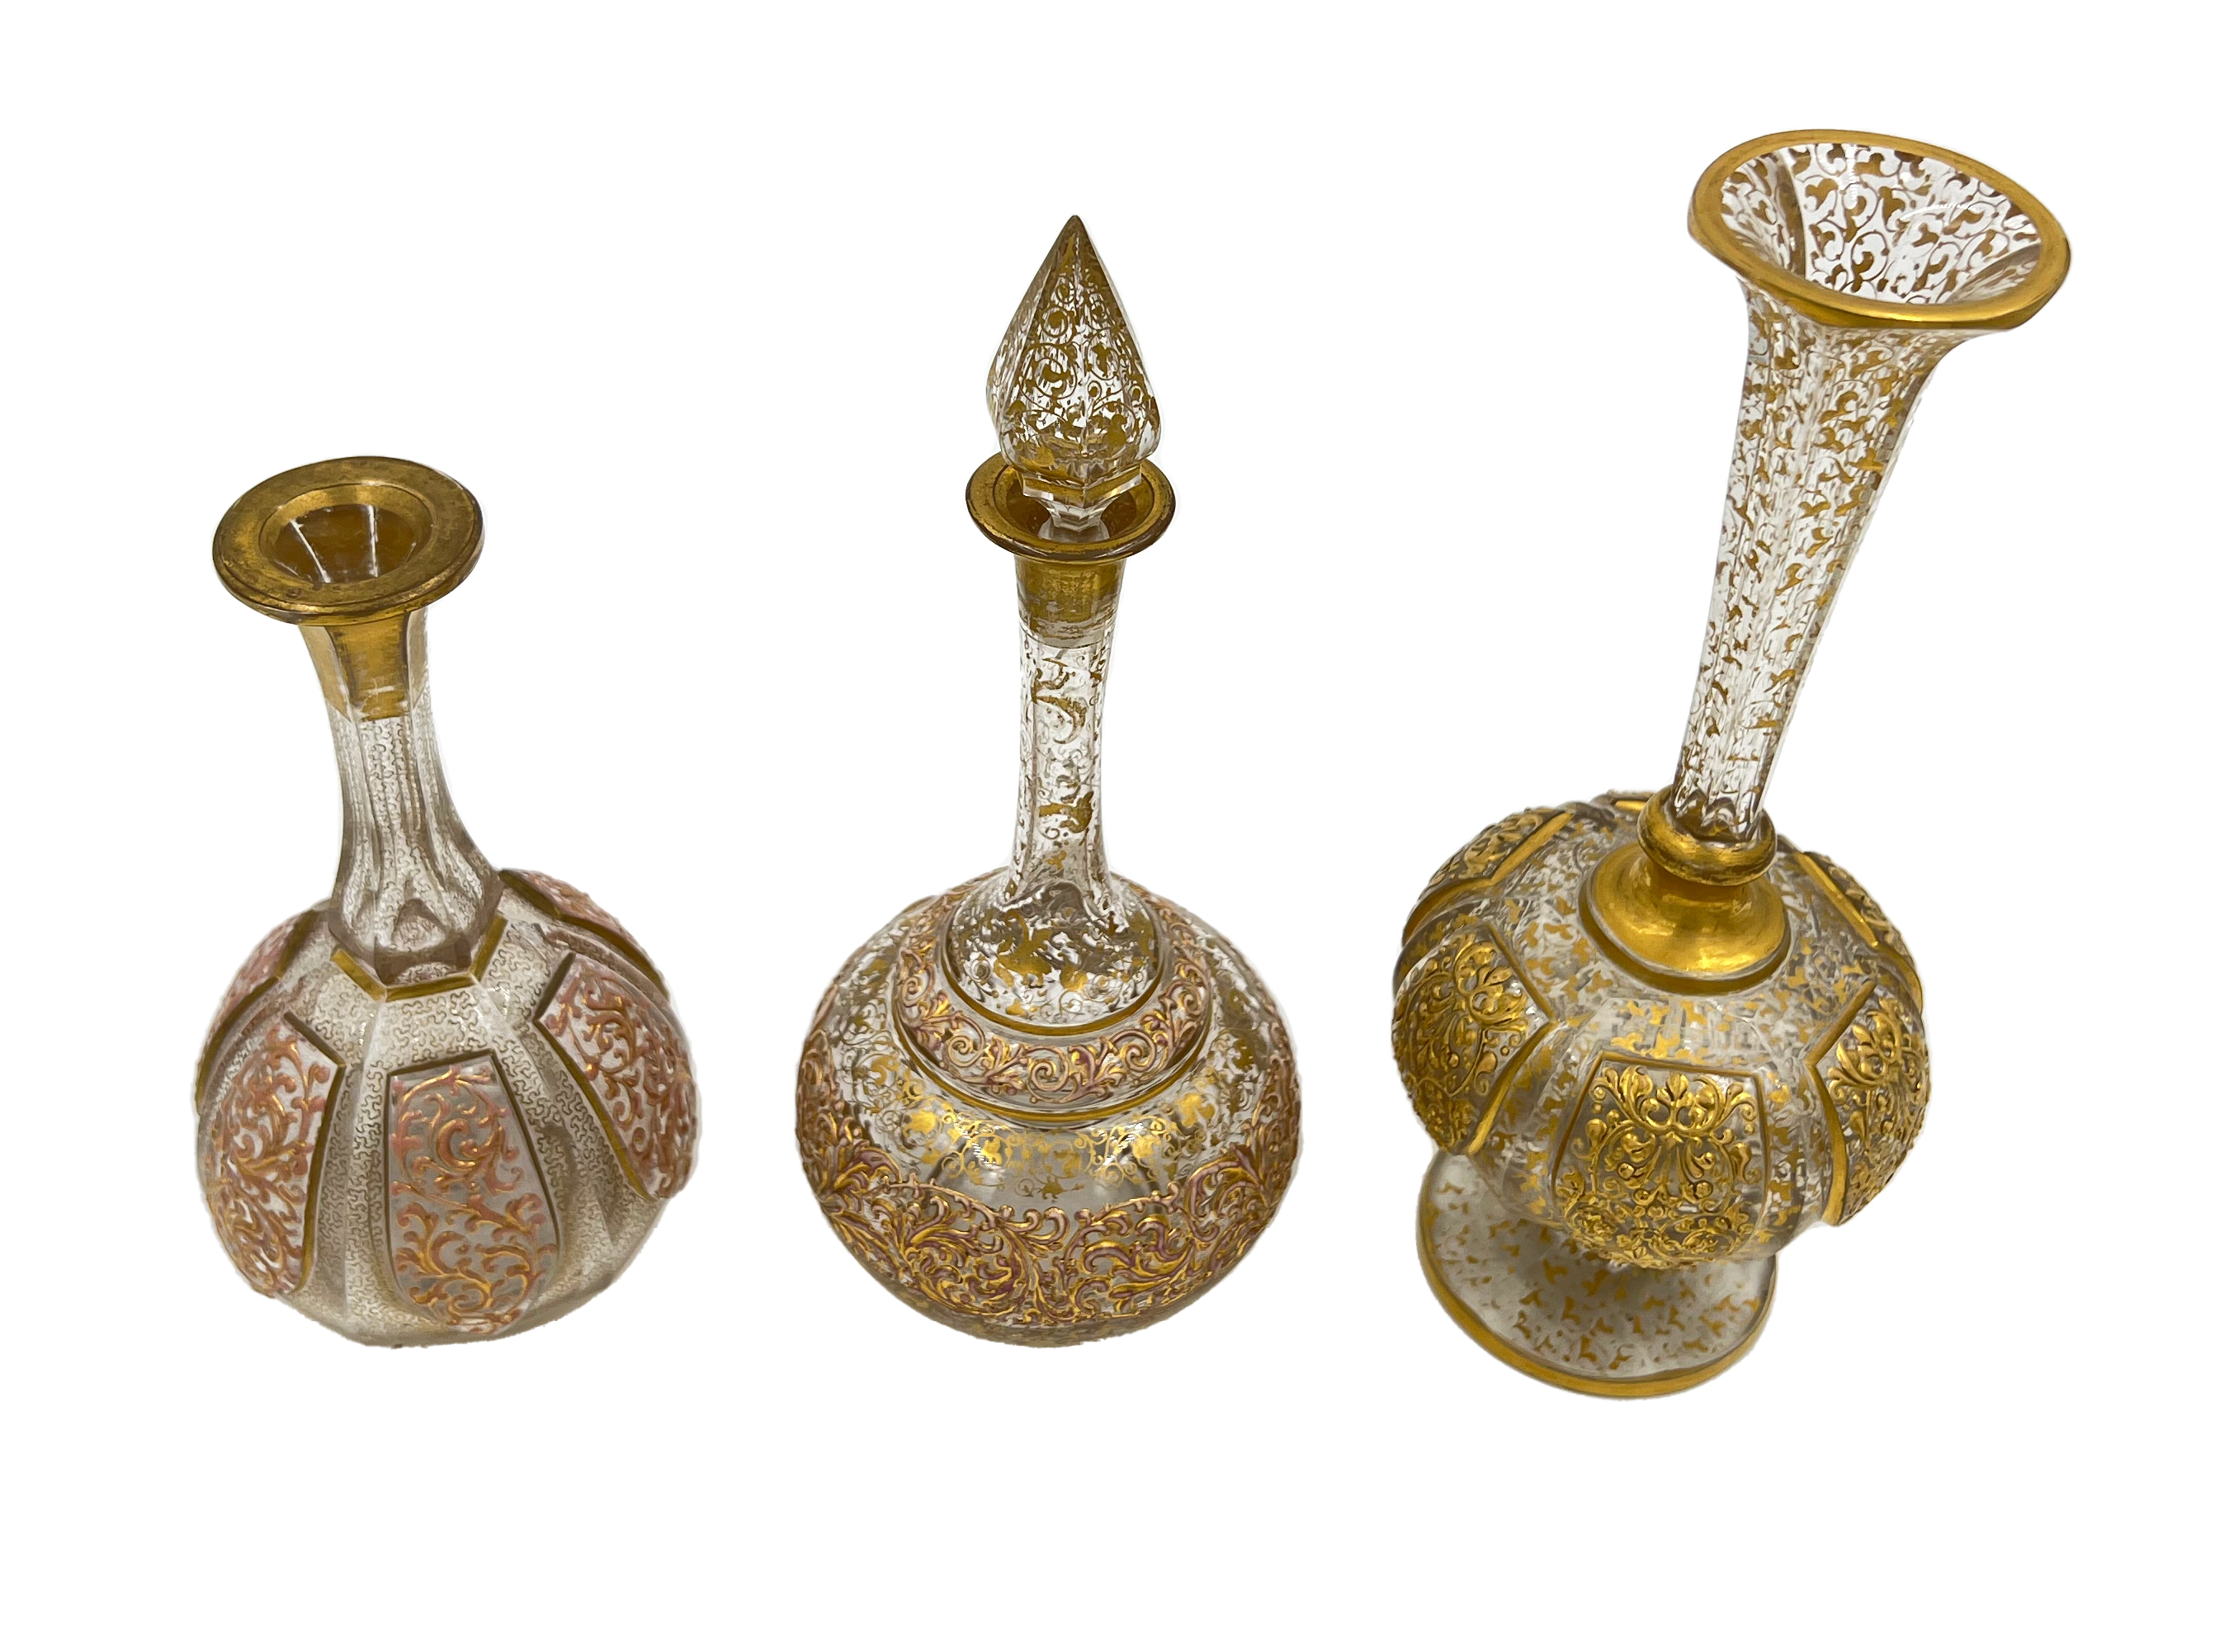 SET OF BOHEMIAN GLASS VASES AND BOTTLE - Image 2 of 2